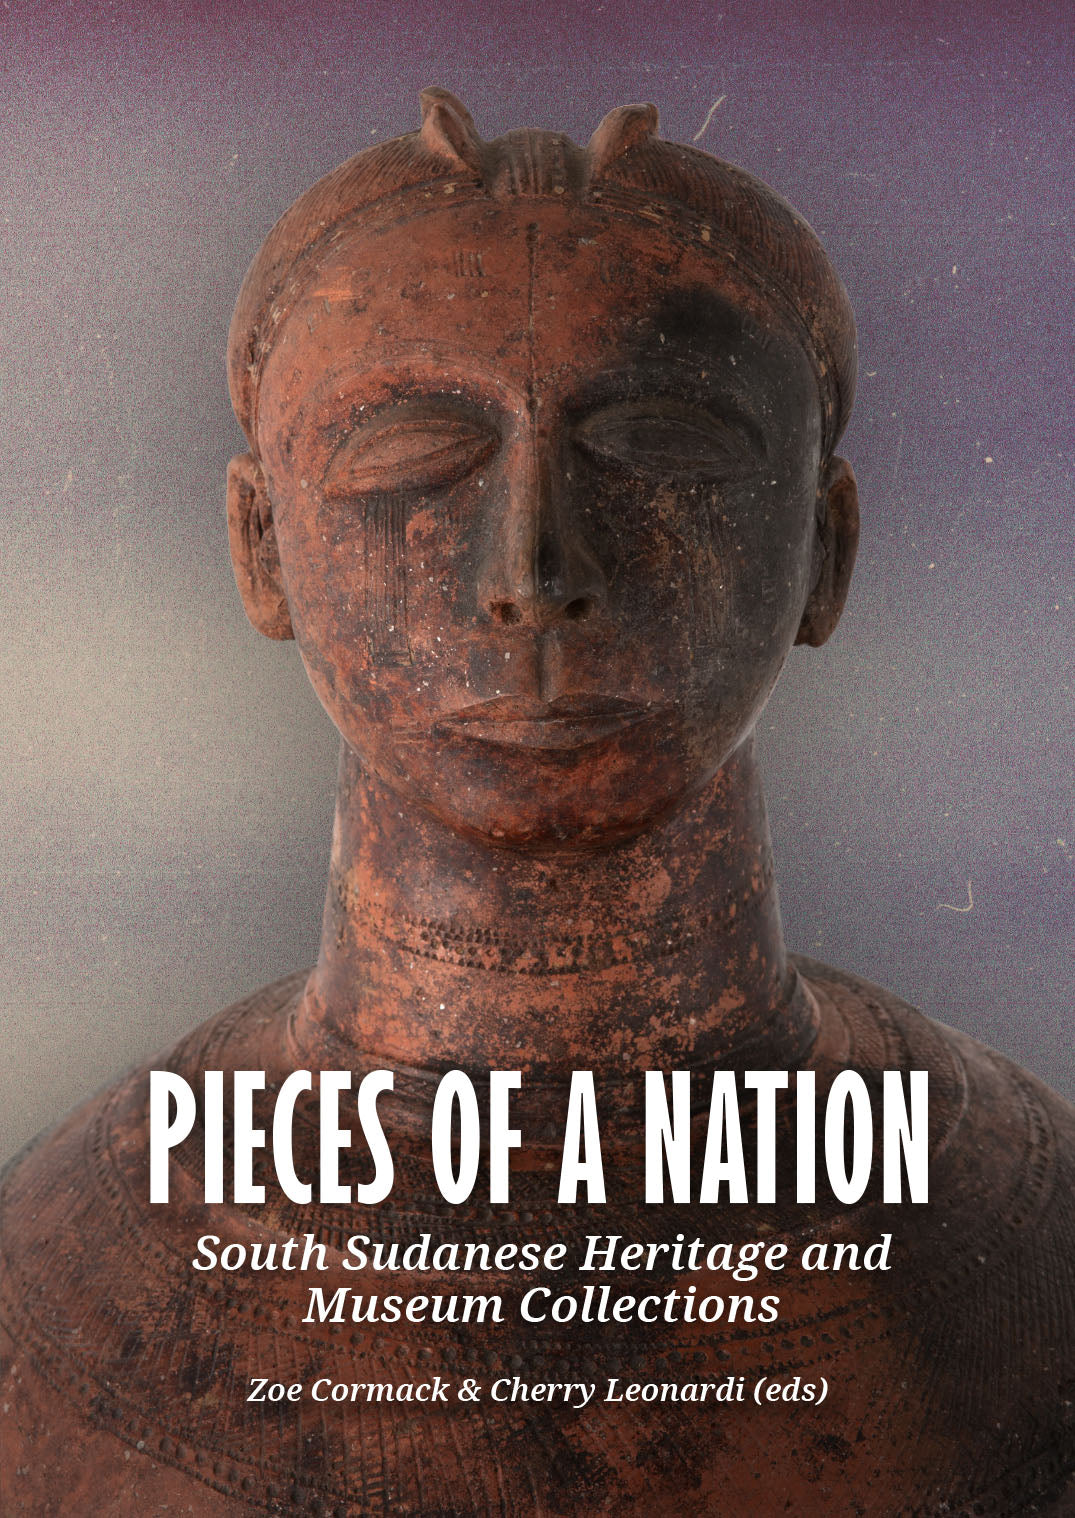 Pieces of a Nation: South Sudanese Heritage and Museum Collections.